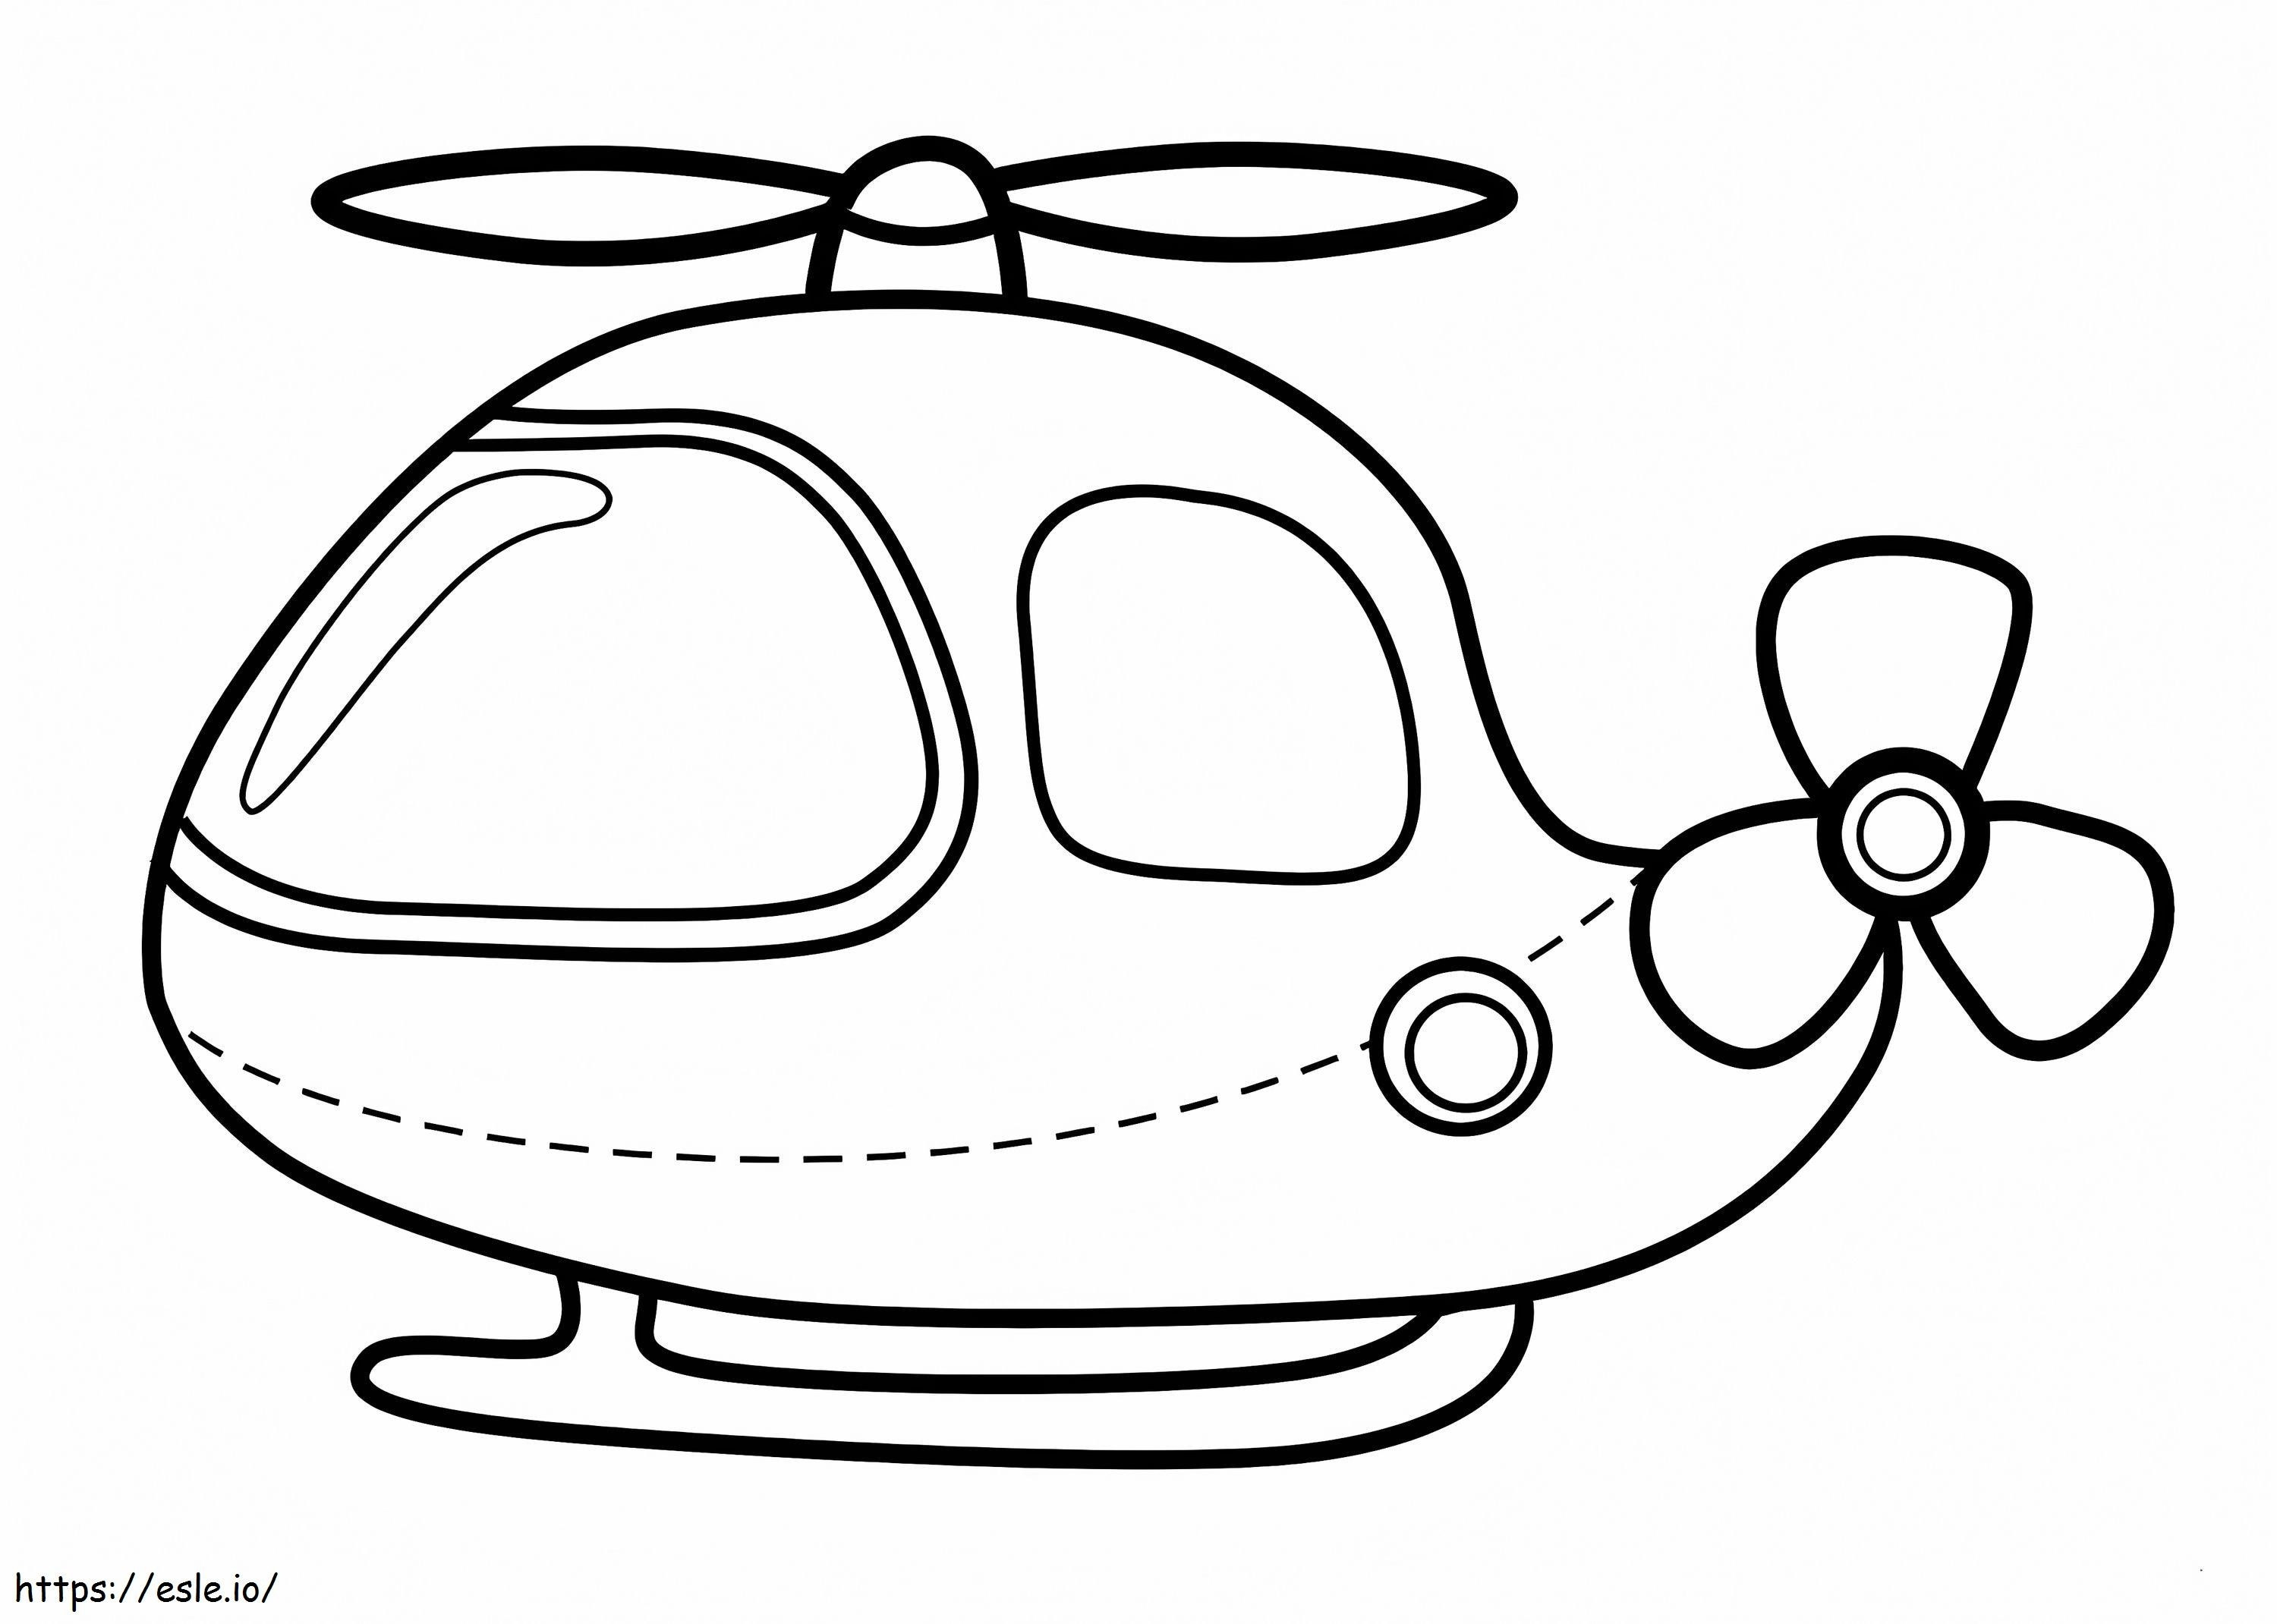 10_1658 coloring page